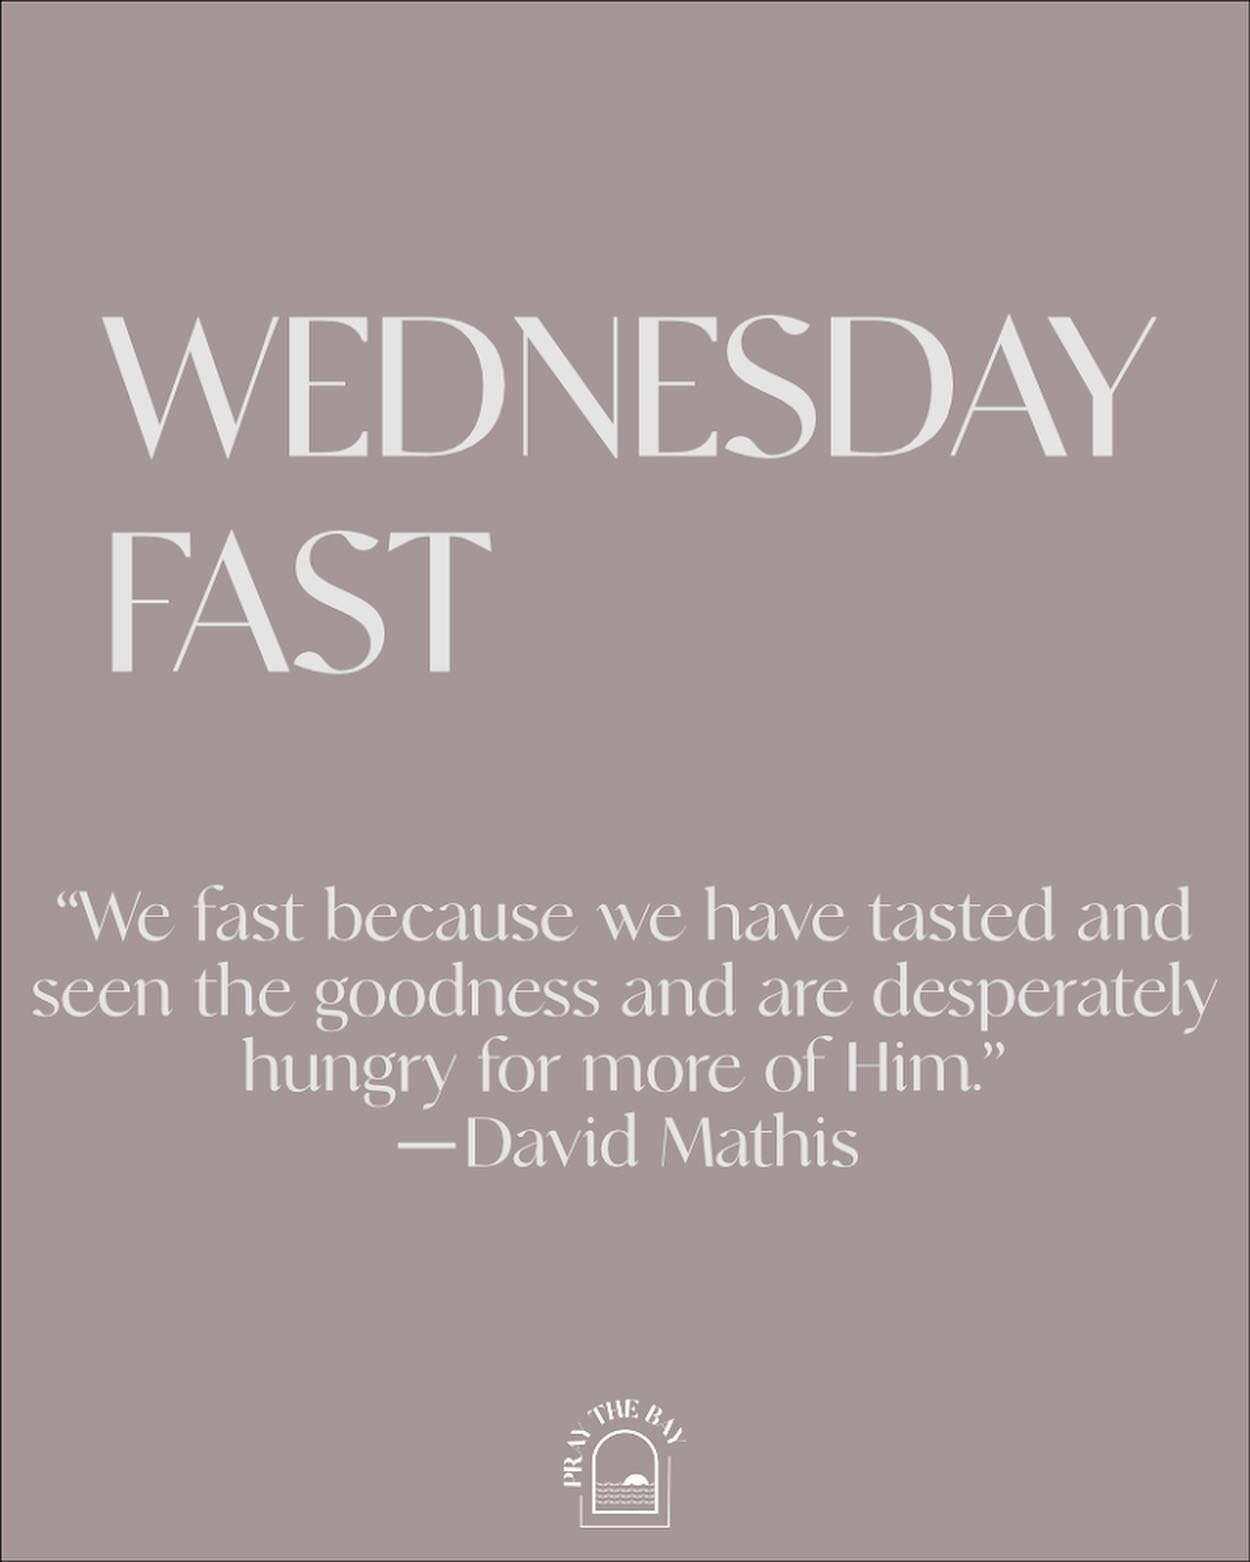 It&rsquo;s Wednesday Fast!
Join us as we take this day to fast and just be in His Presence more and allow Him to speak through you and to you! 
Lay your burdens down at His feet and grow closer to Him!